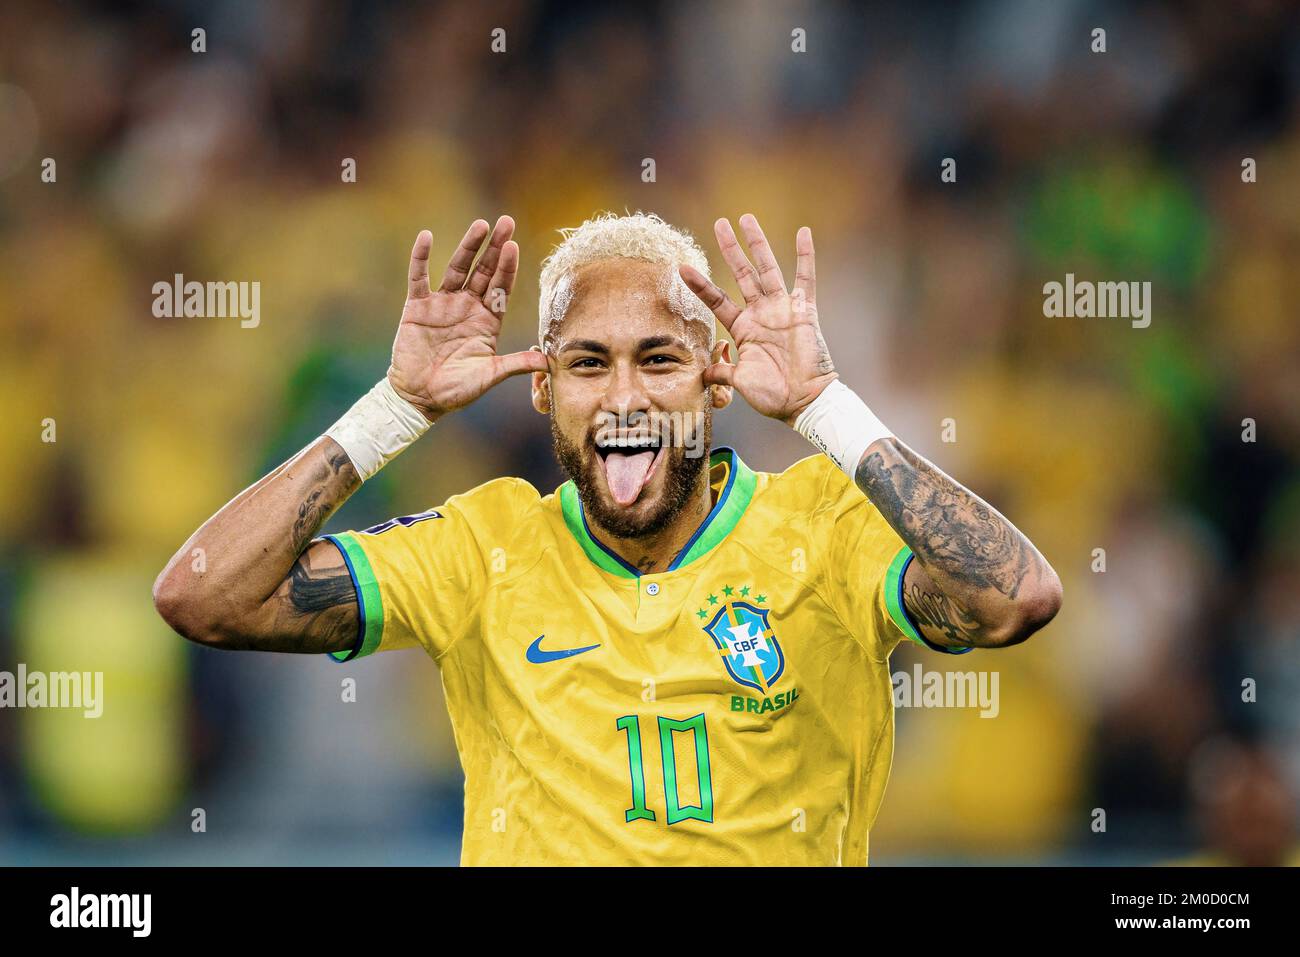 Doha, Catar. 05th Dec, 2022. Neymar Jr. of Brazil celebrates after scoring a penalty during the match between Brazil and South Korea, valid for the round of 16 of the World Cup, held at Estádio Estádio 974 in Doha, Qatar. Credit: Marcelo Machado de Melo/FotoArena/Alamy Live News Stock Photo